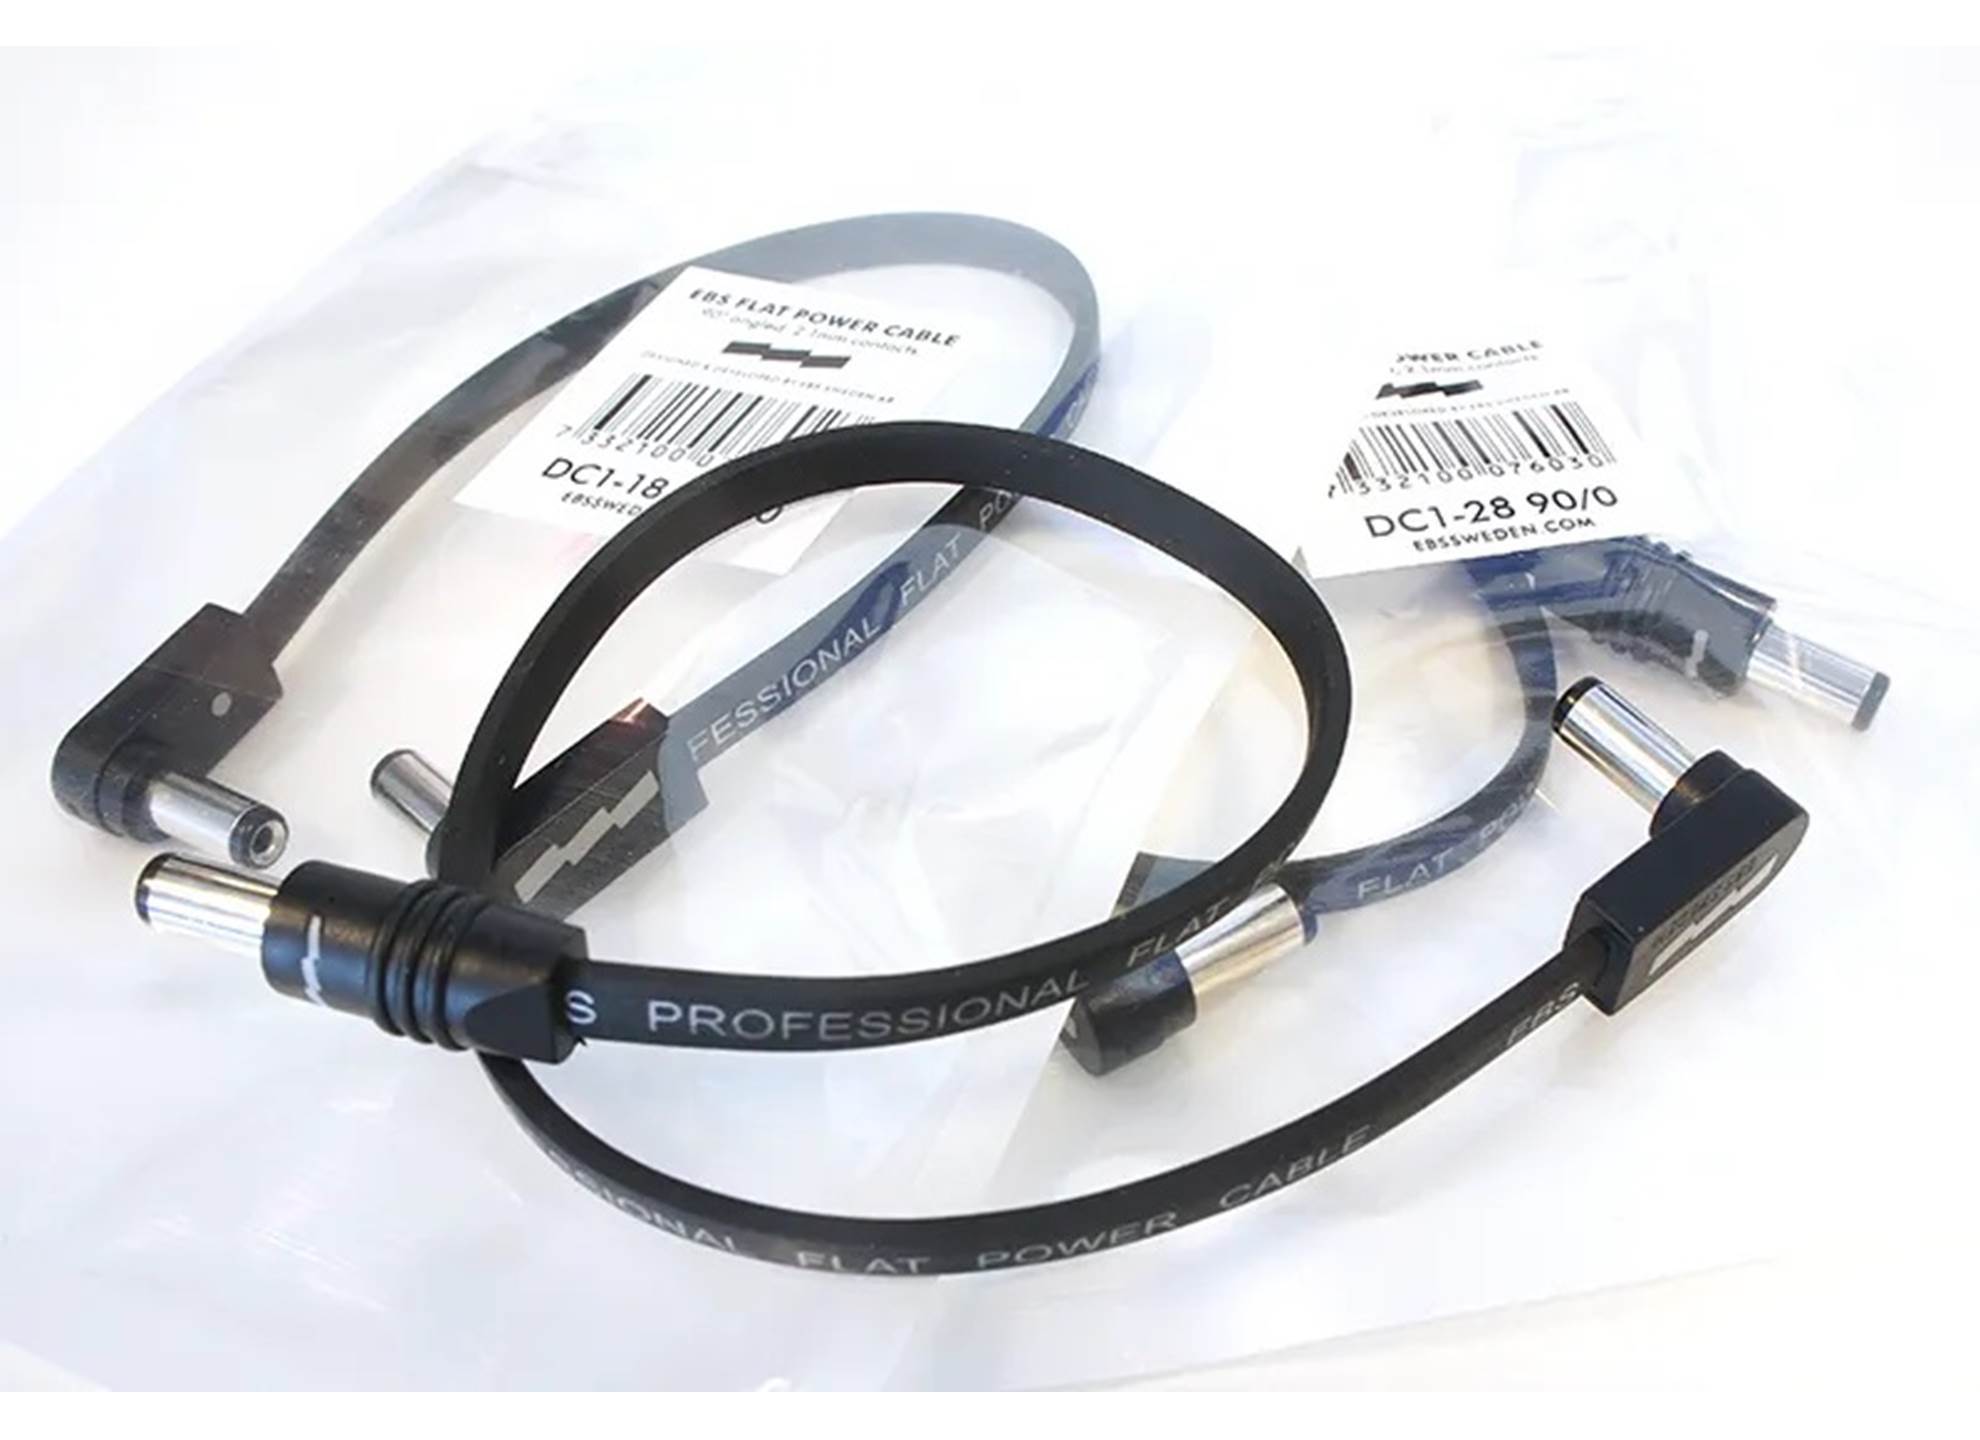 DC1-38 90/0 Flat Power Cable 38 cm